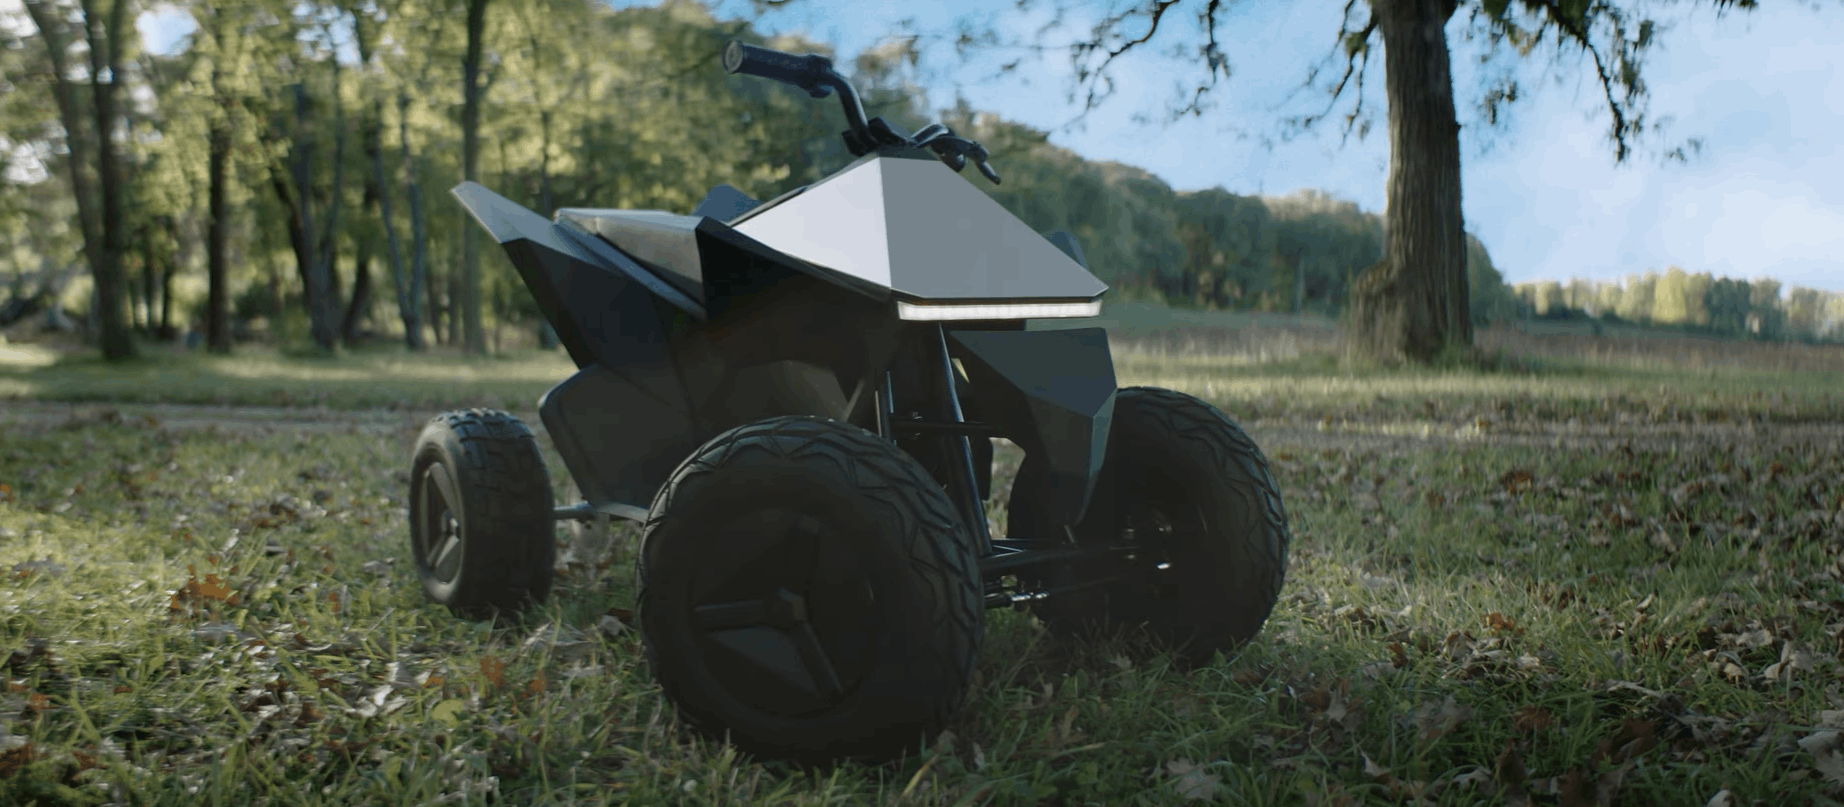 A Tesla for Kids? Discover the Cyberquad Four-Wheel